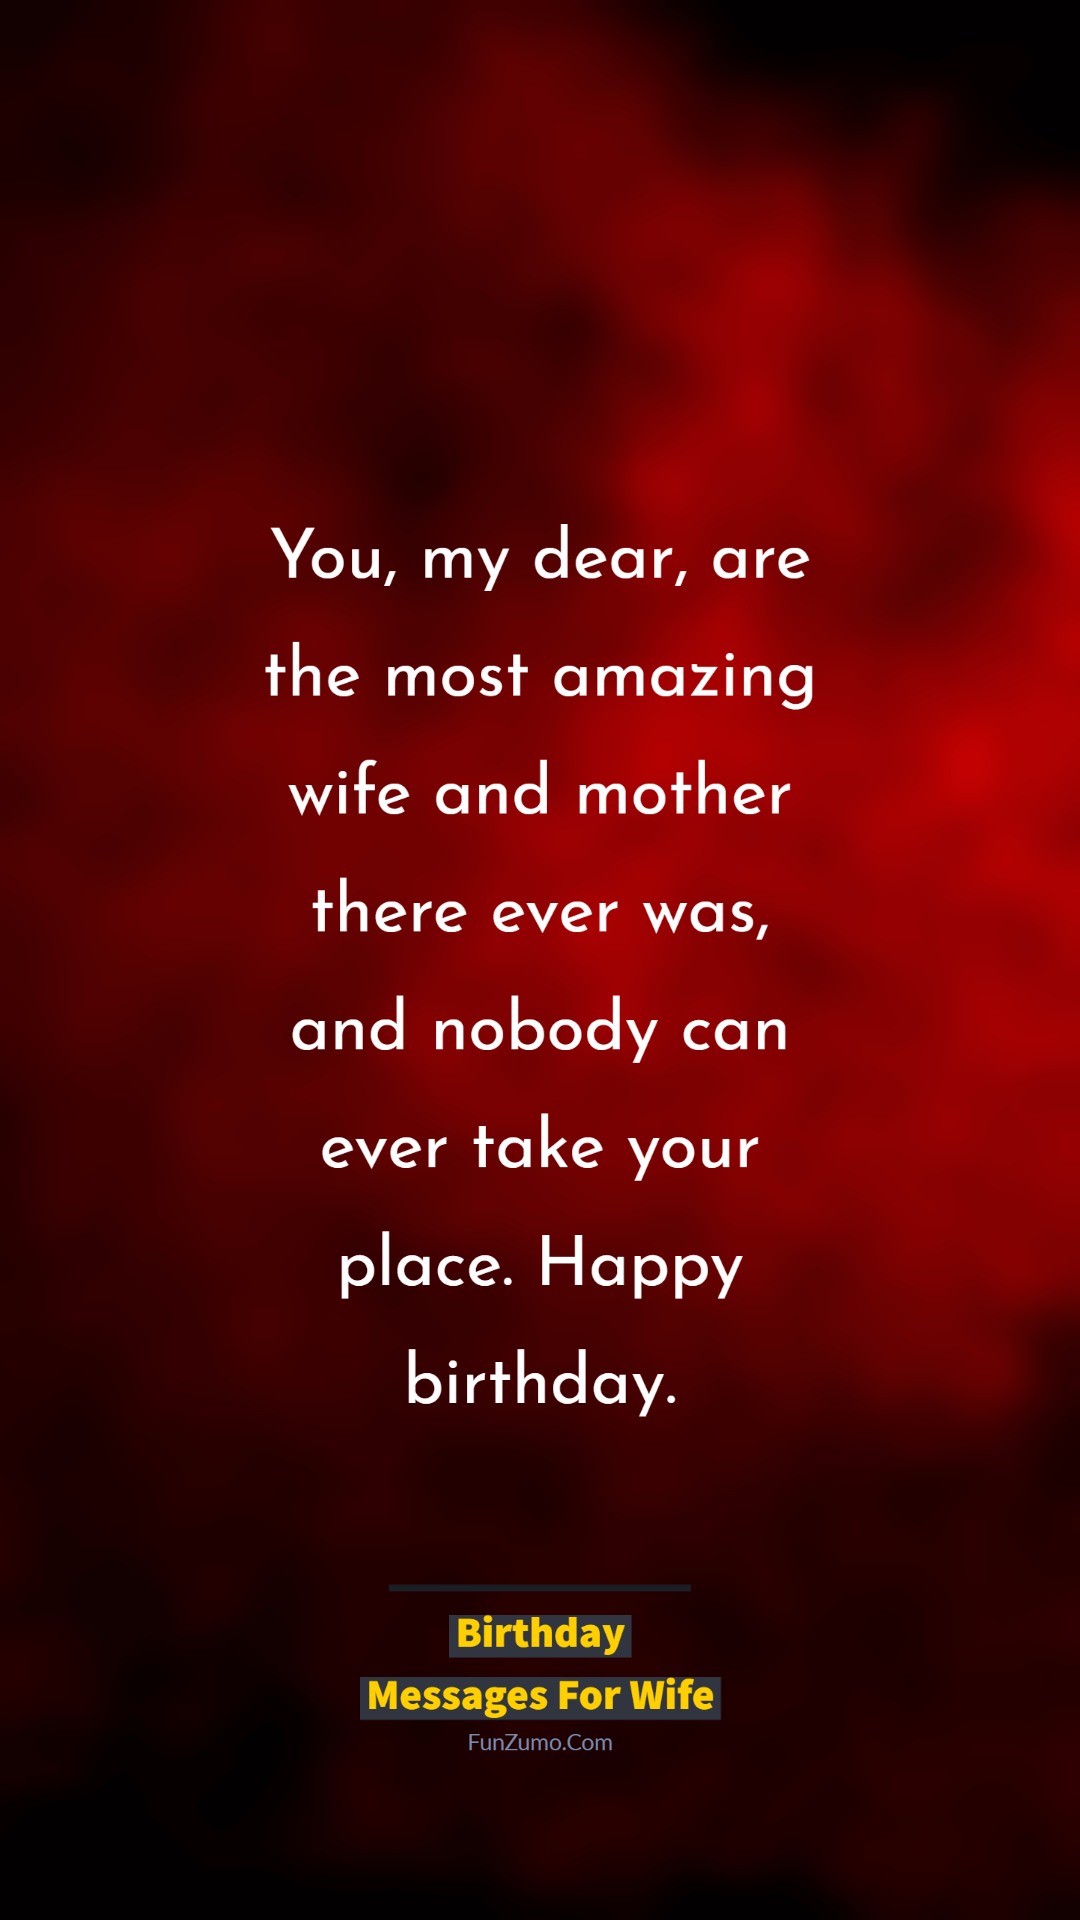 best birthday love quotes messages wishes and images